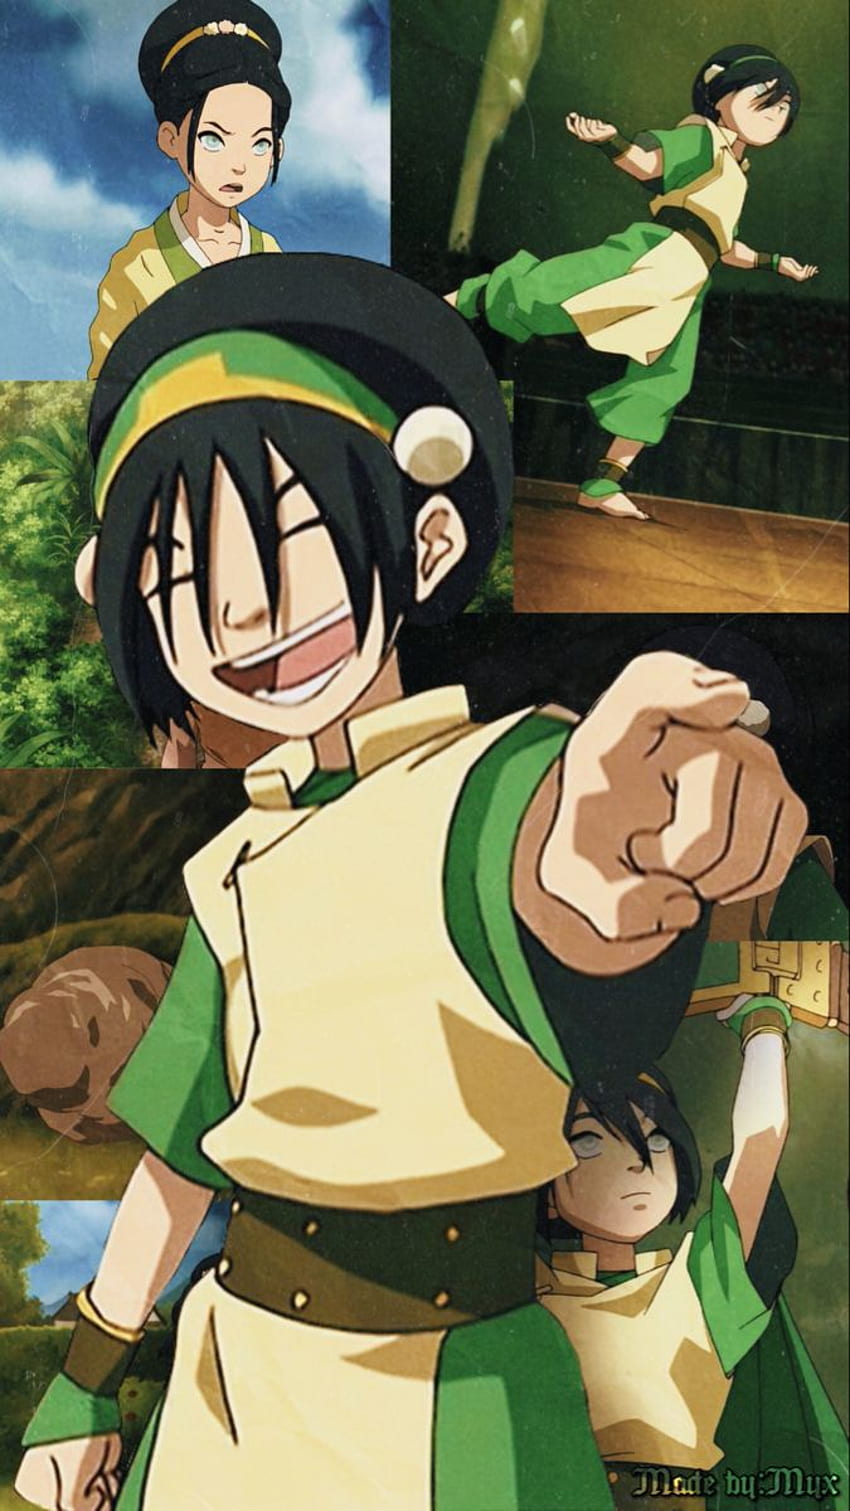 Toph Beifong  Avatar The Last Airbender wallpaper  Anime wallpapers   13686